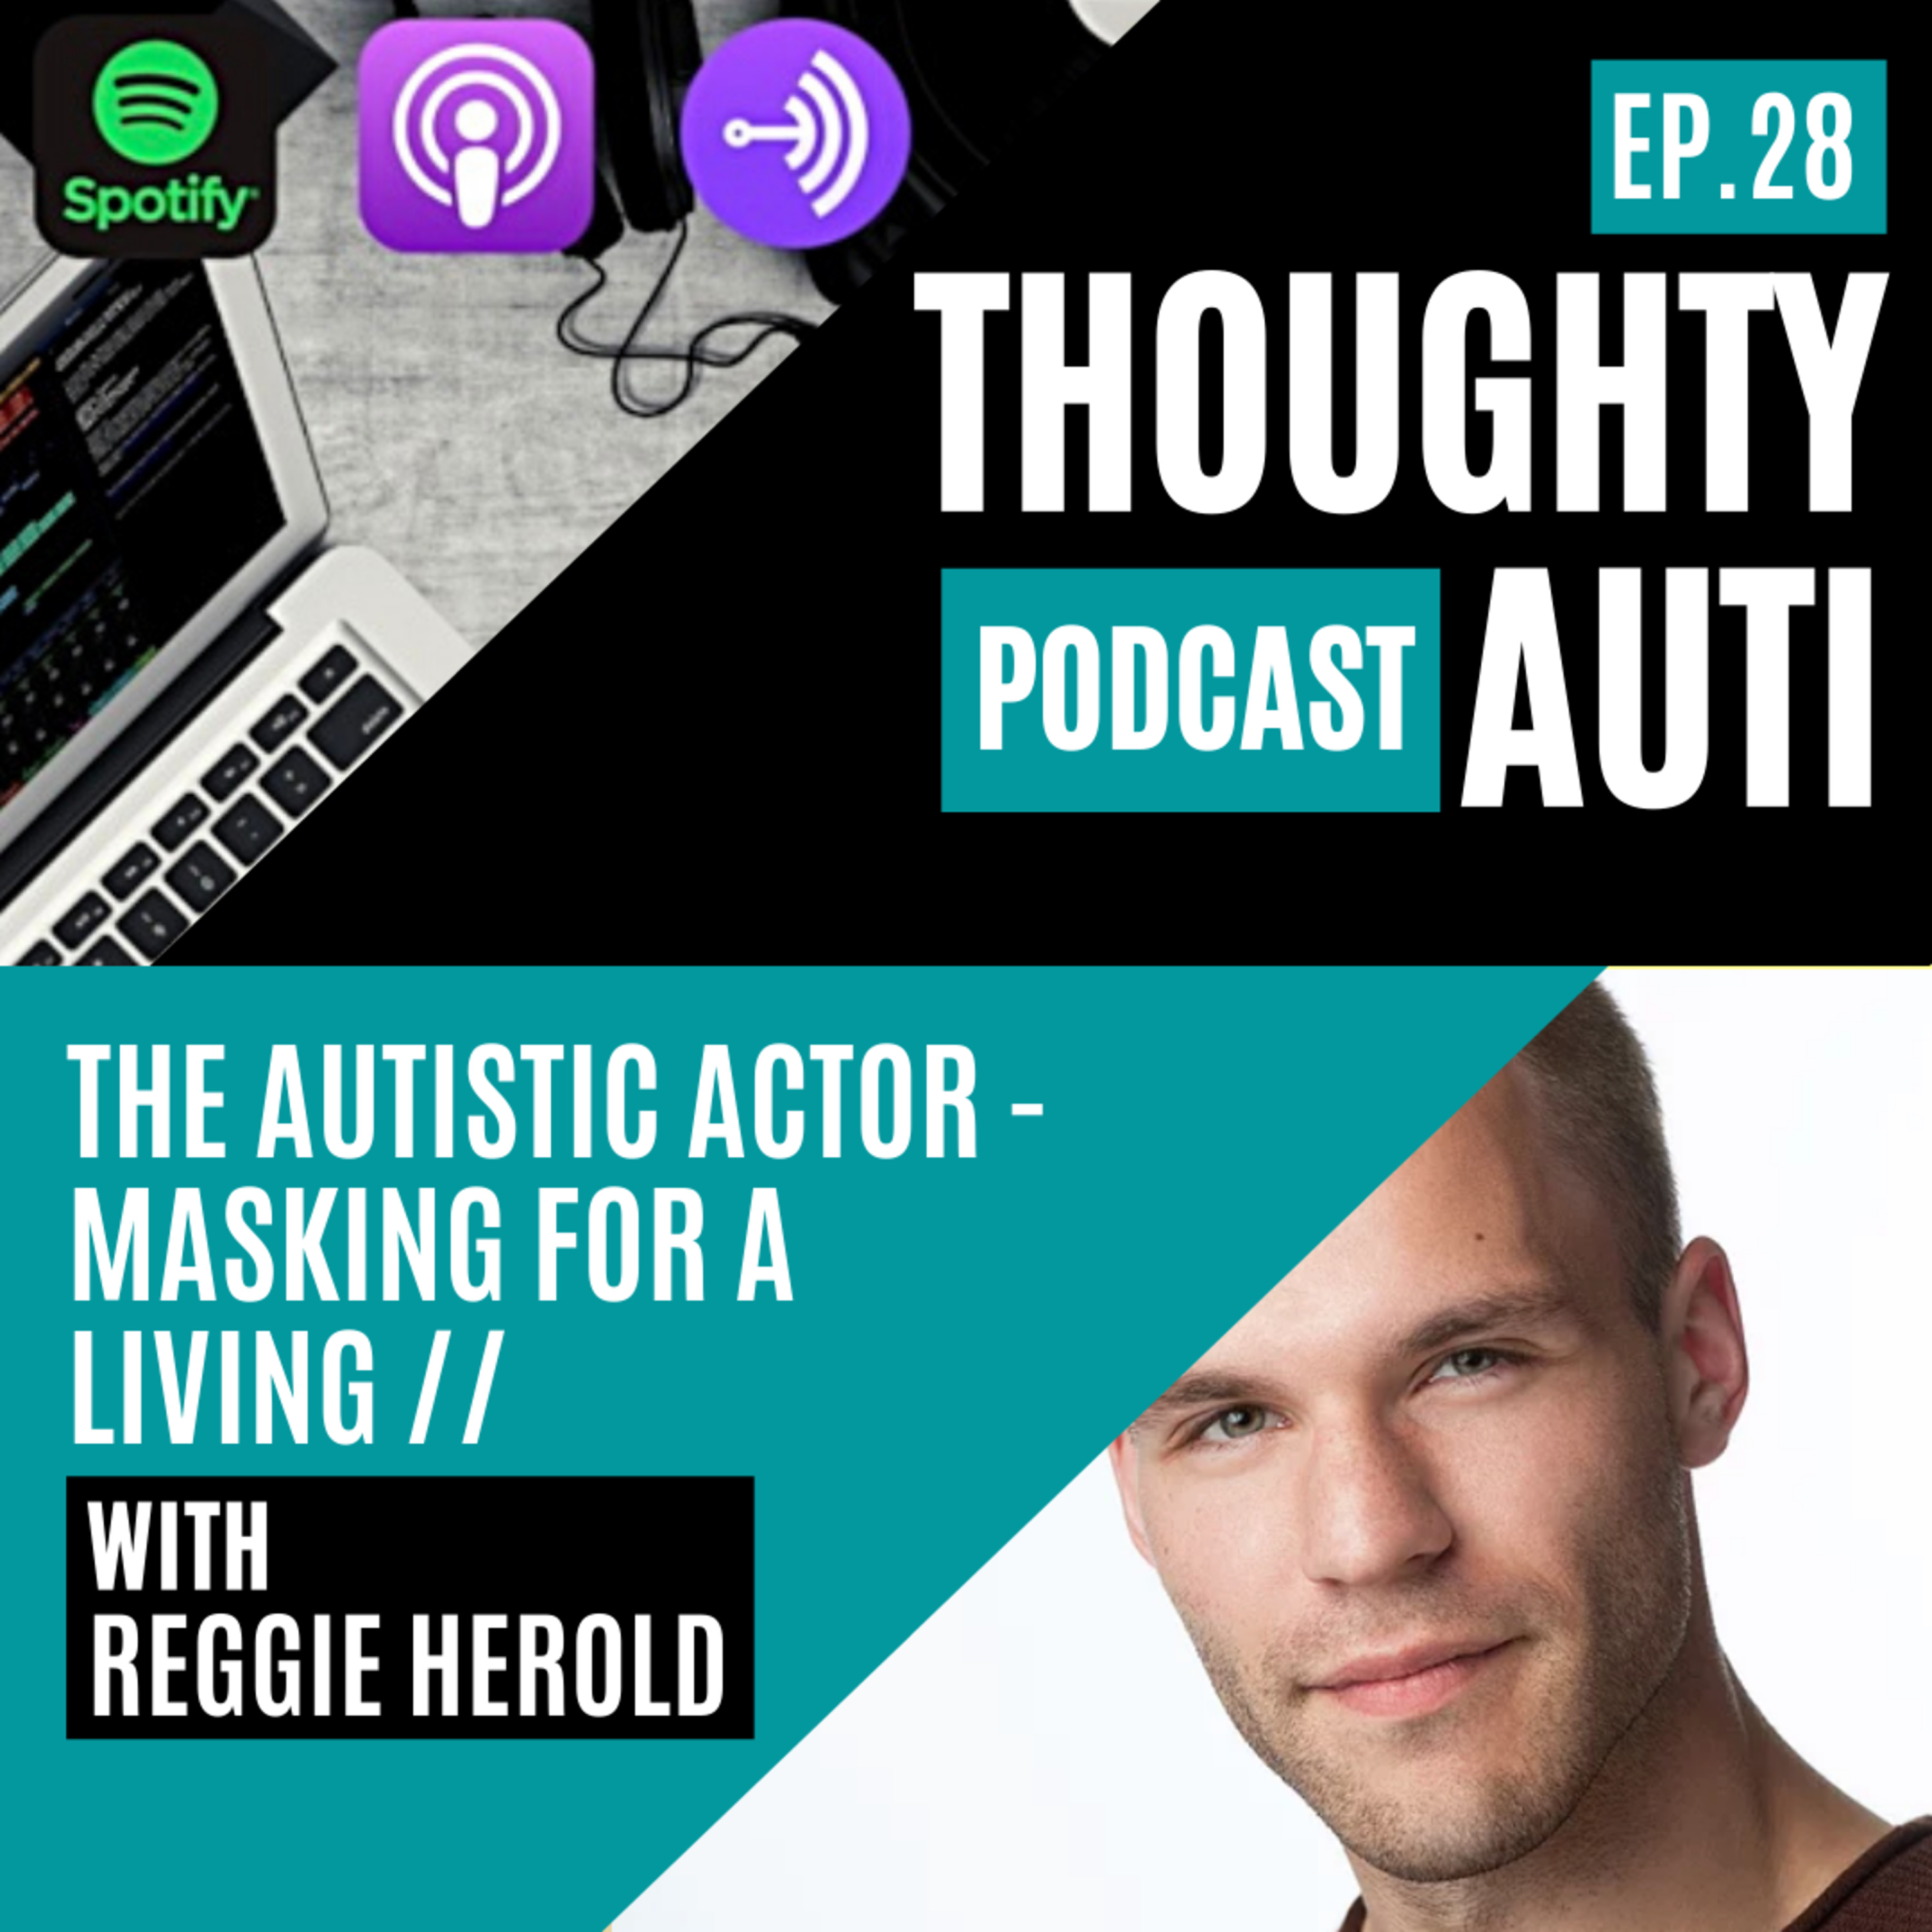 The Autistic Actor - Masking For A Living w/Reggie Herold